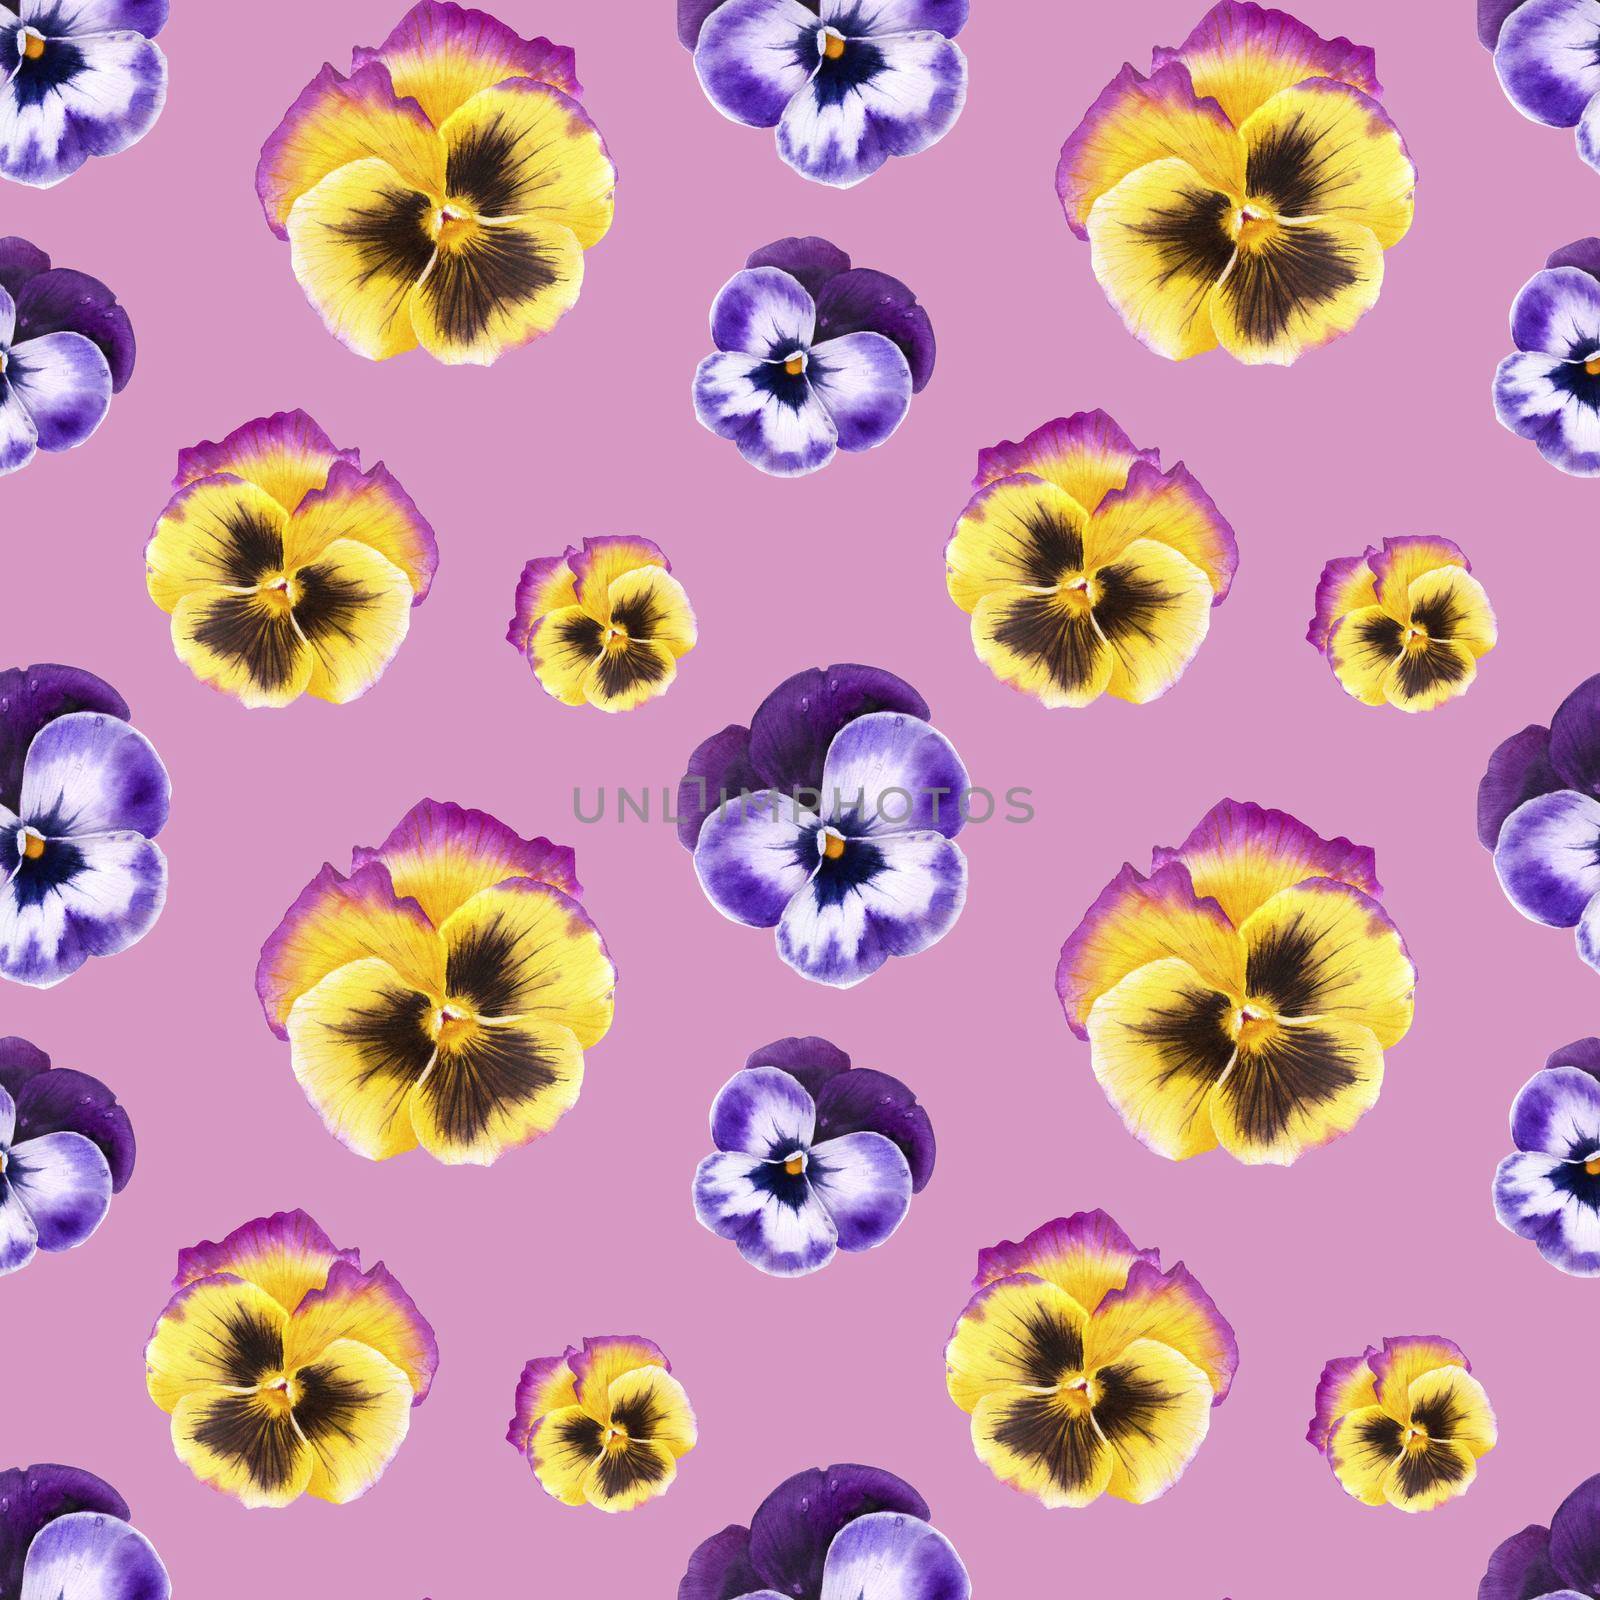 Blue and yellow pansy flowers watercolor seamless pattern on a pink background with clipping path